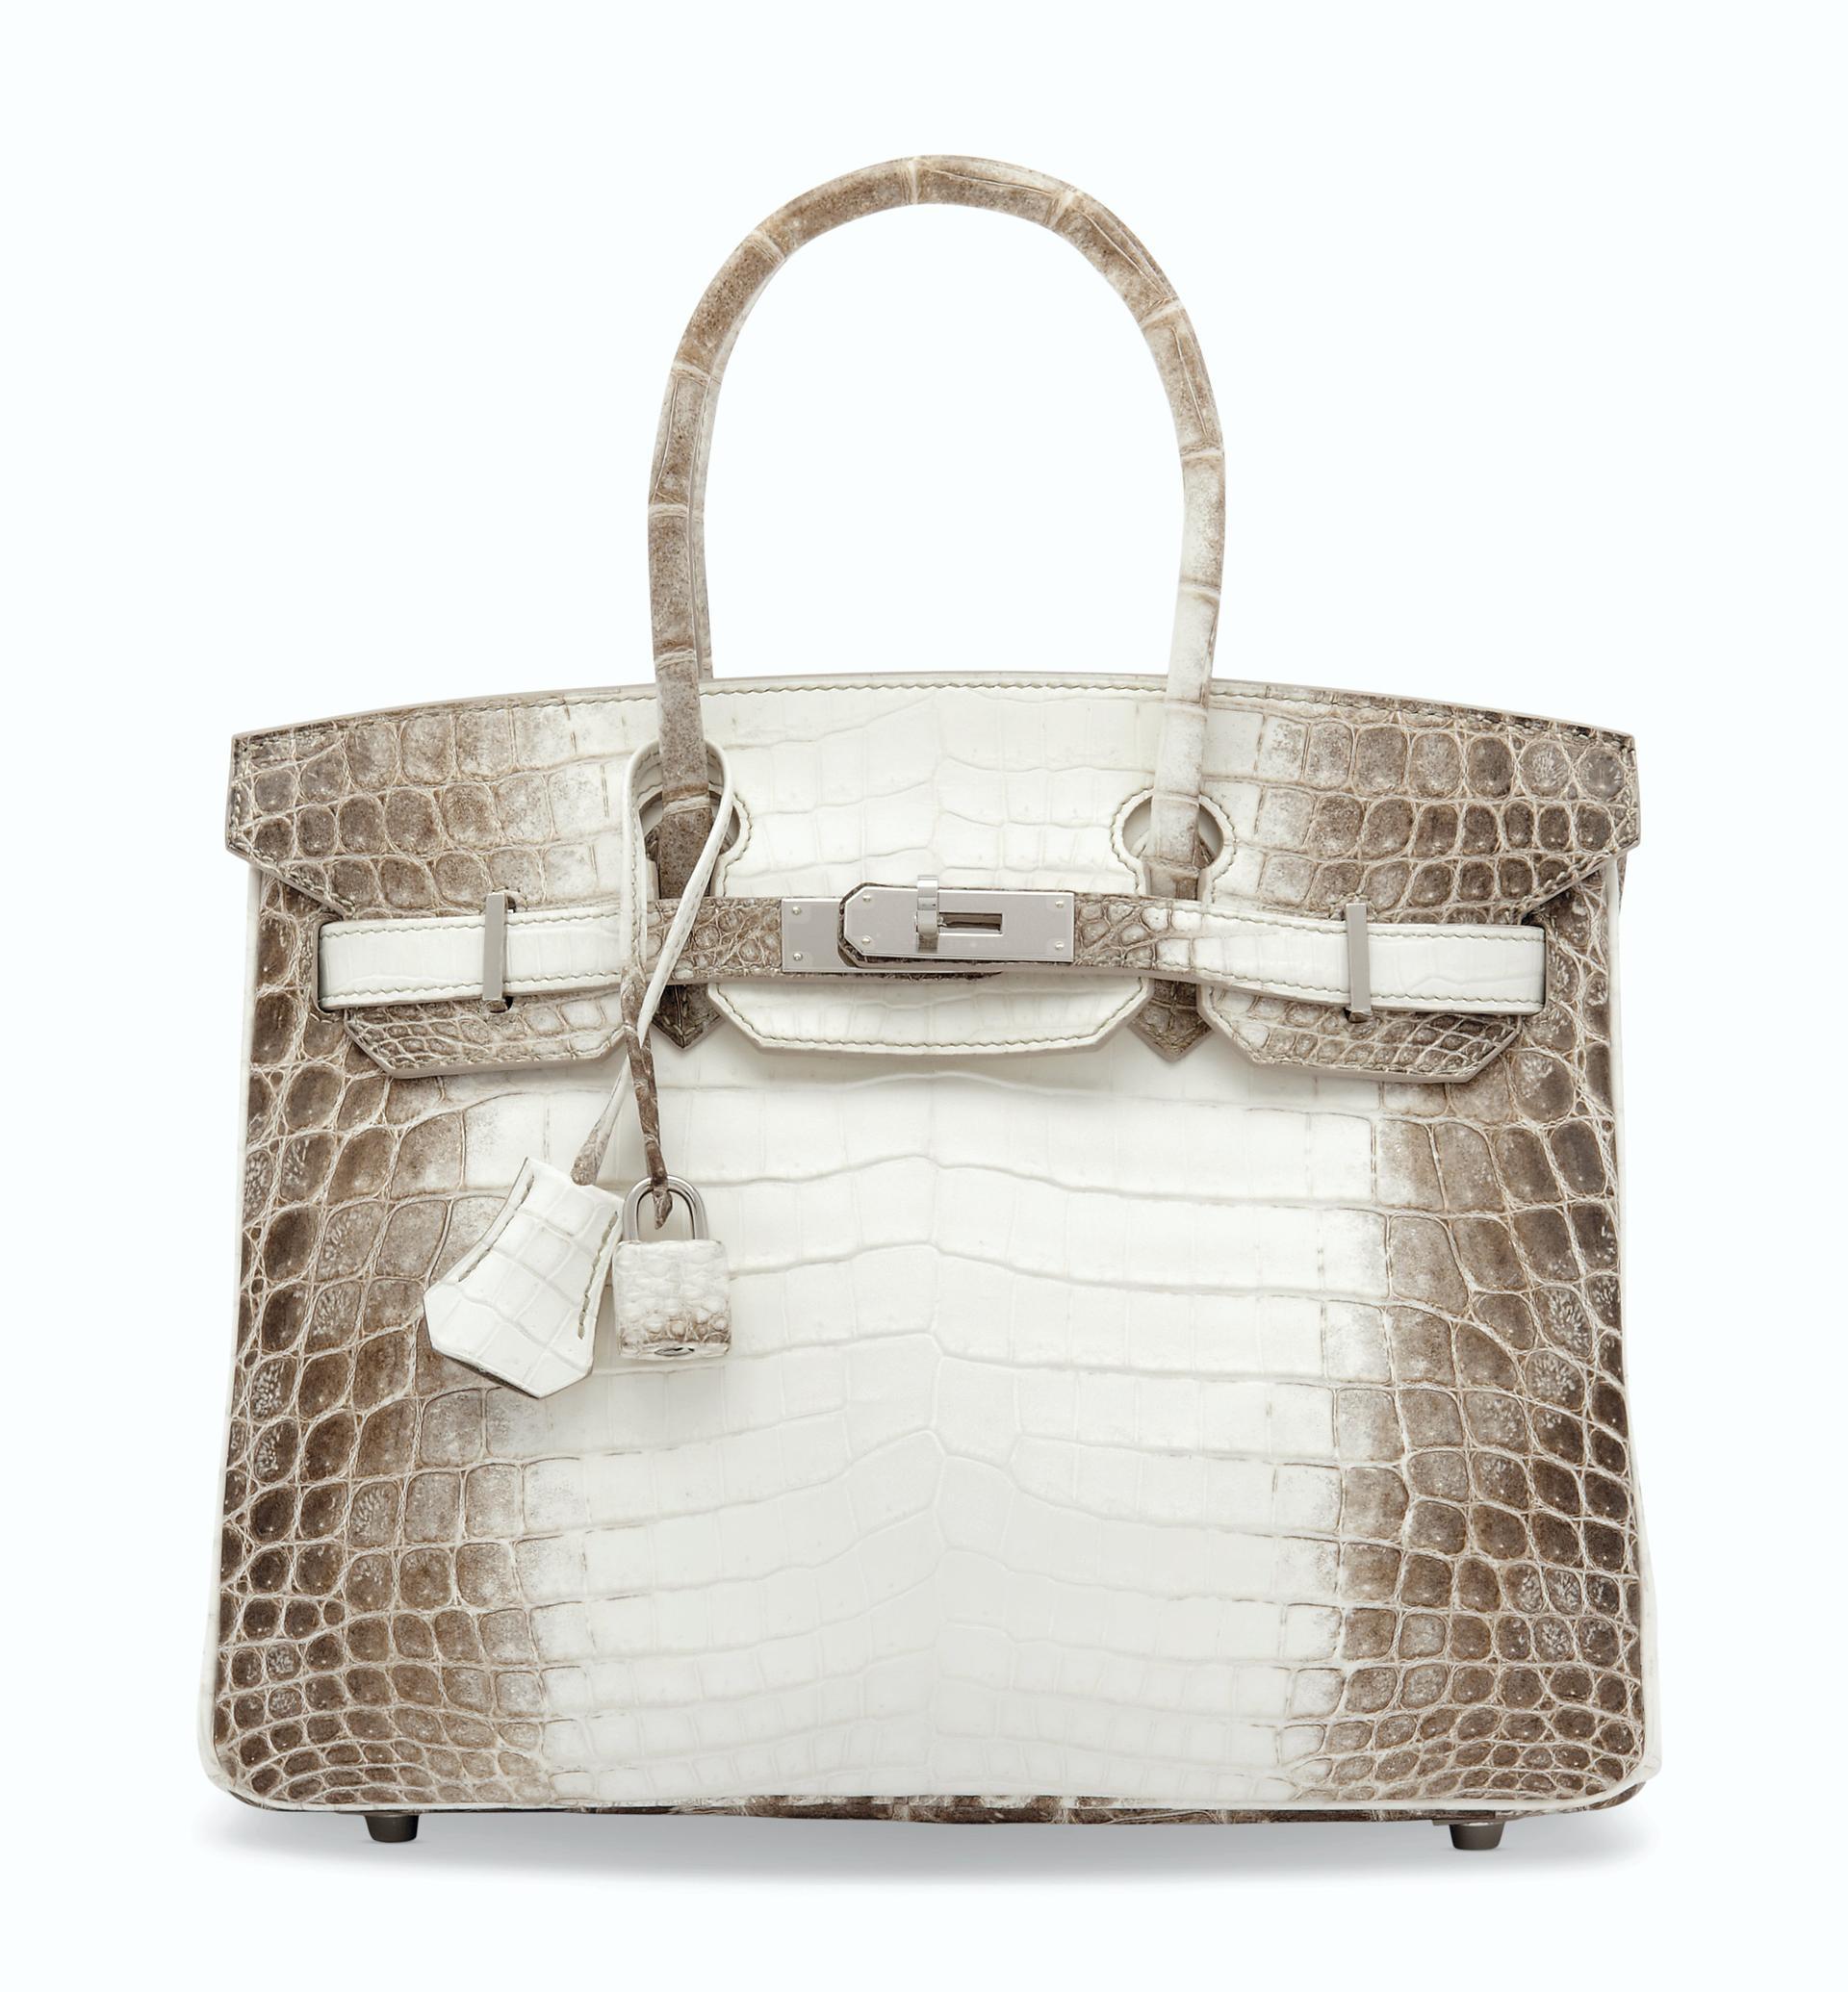 Hermes, Chanel and Gucci: 21 of the world's most valuable handbags